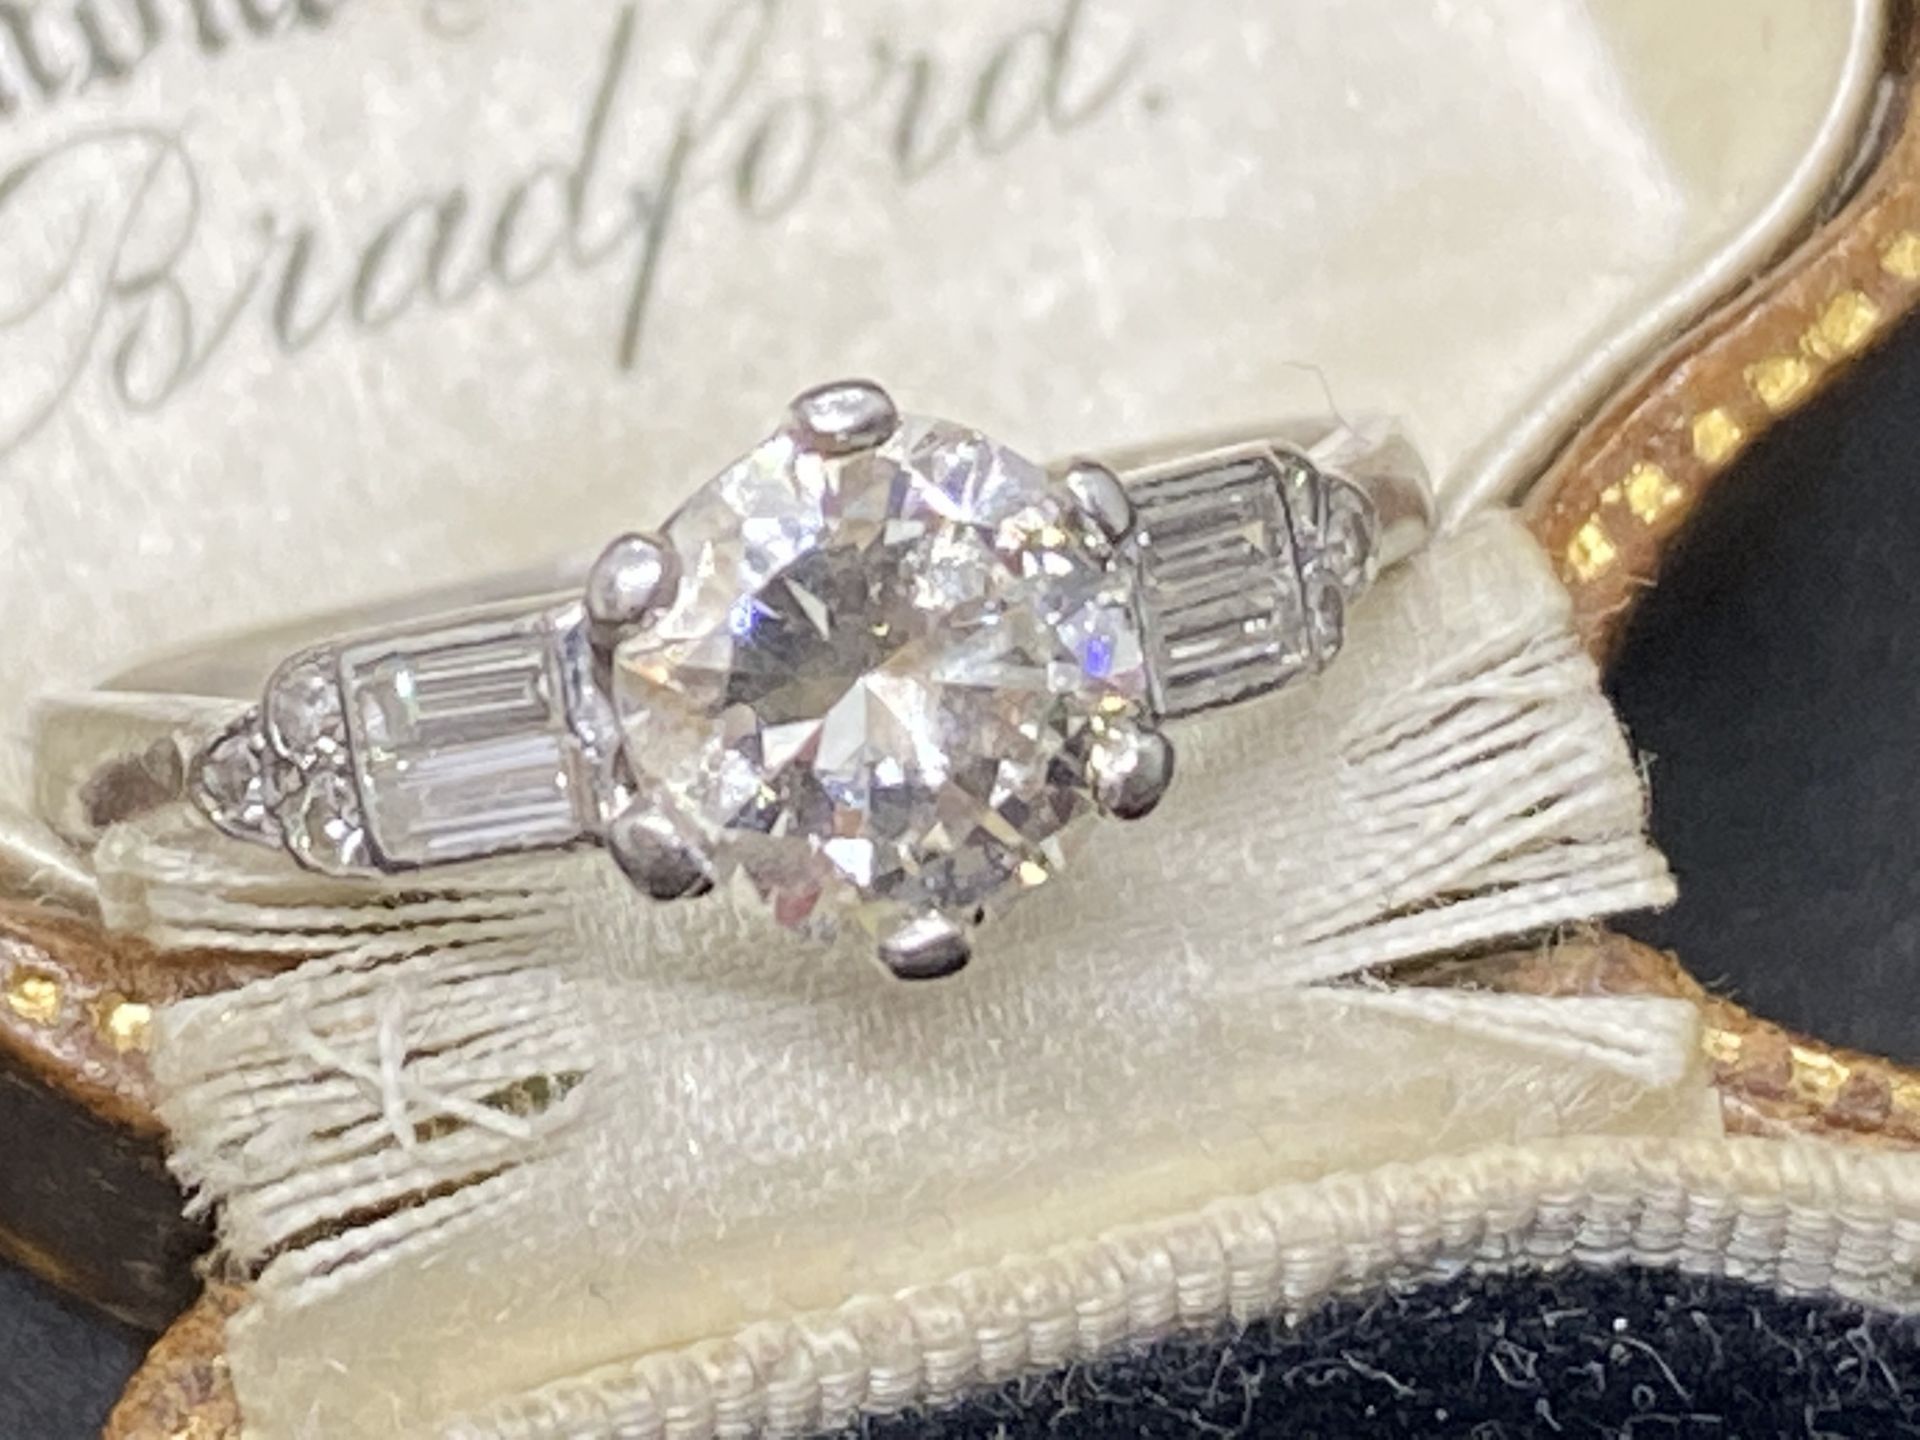 VINTAGE PLATINUM DIAMOND SOLITAIRE WITH DIAMOND BAGUETTE SHOULDERS 1.40ct TOTAL DIAMOND WEIGHT - Image 2 of 5